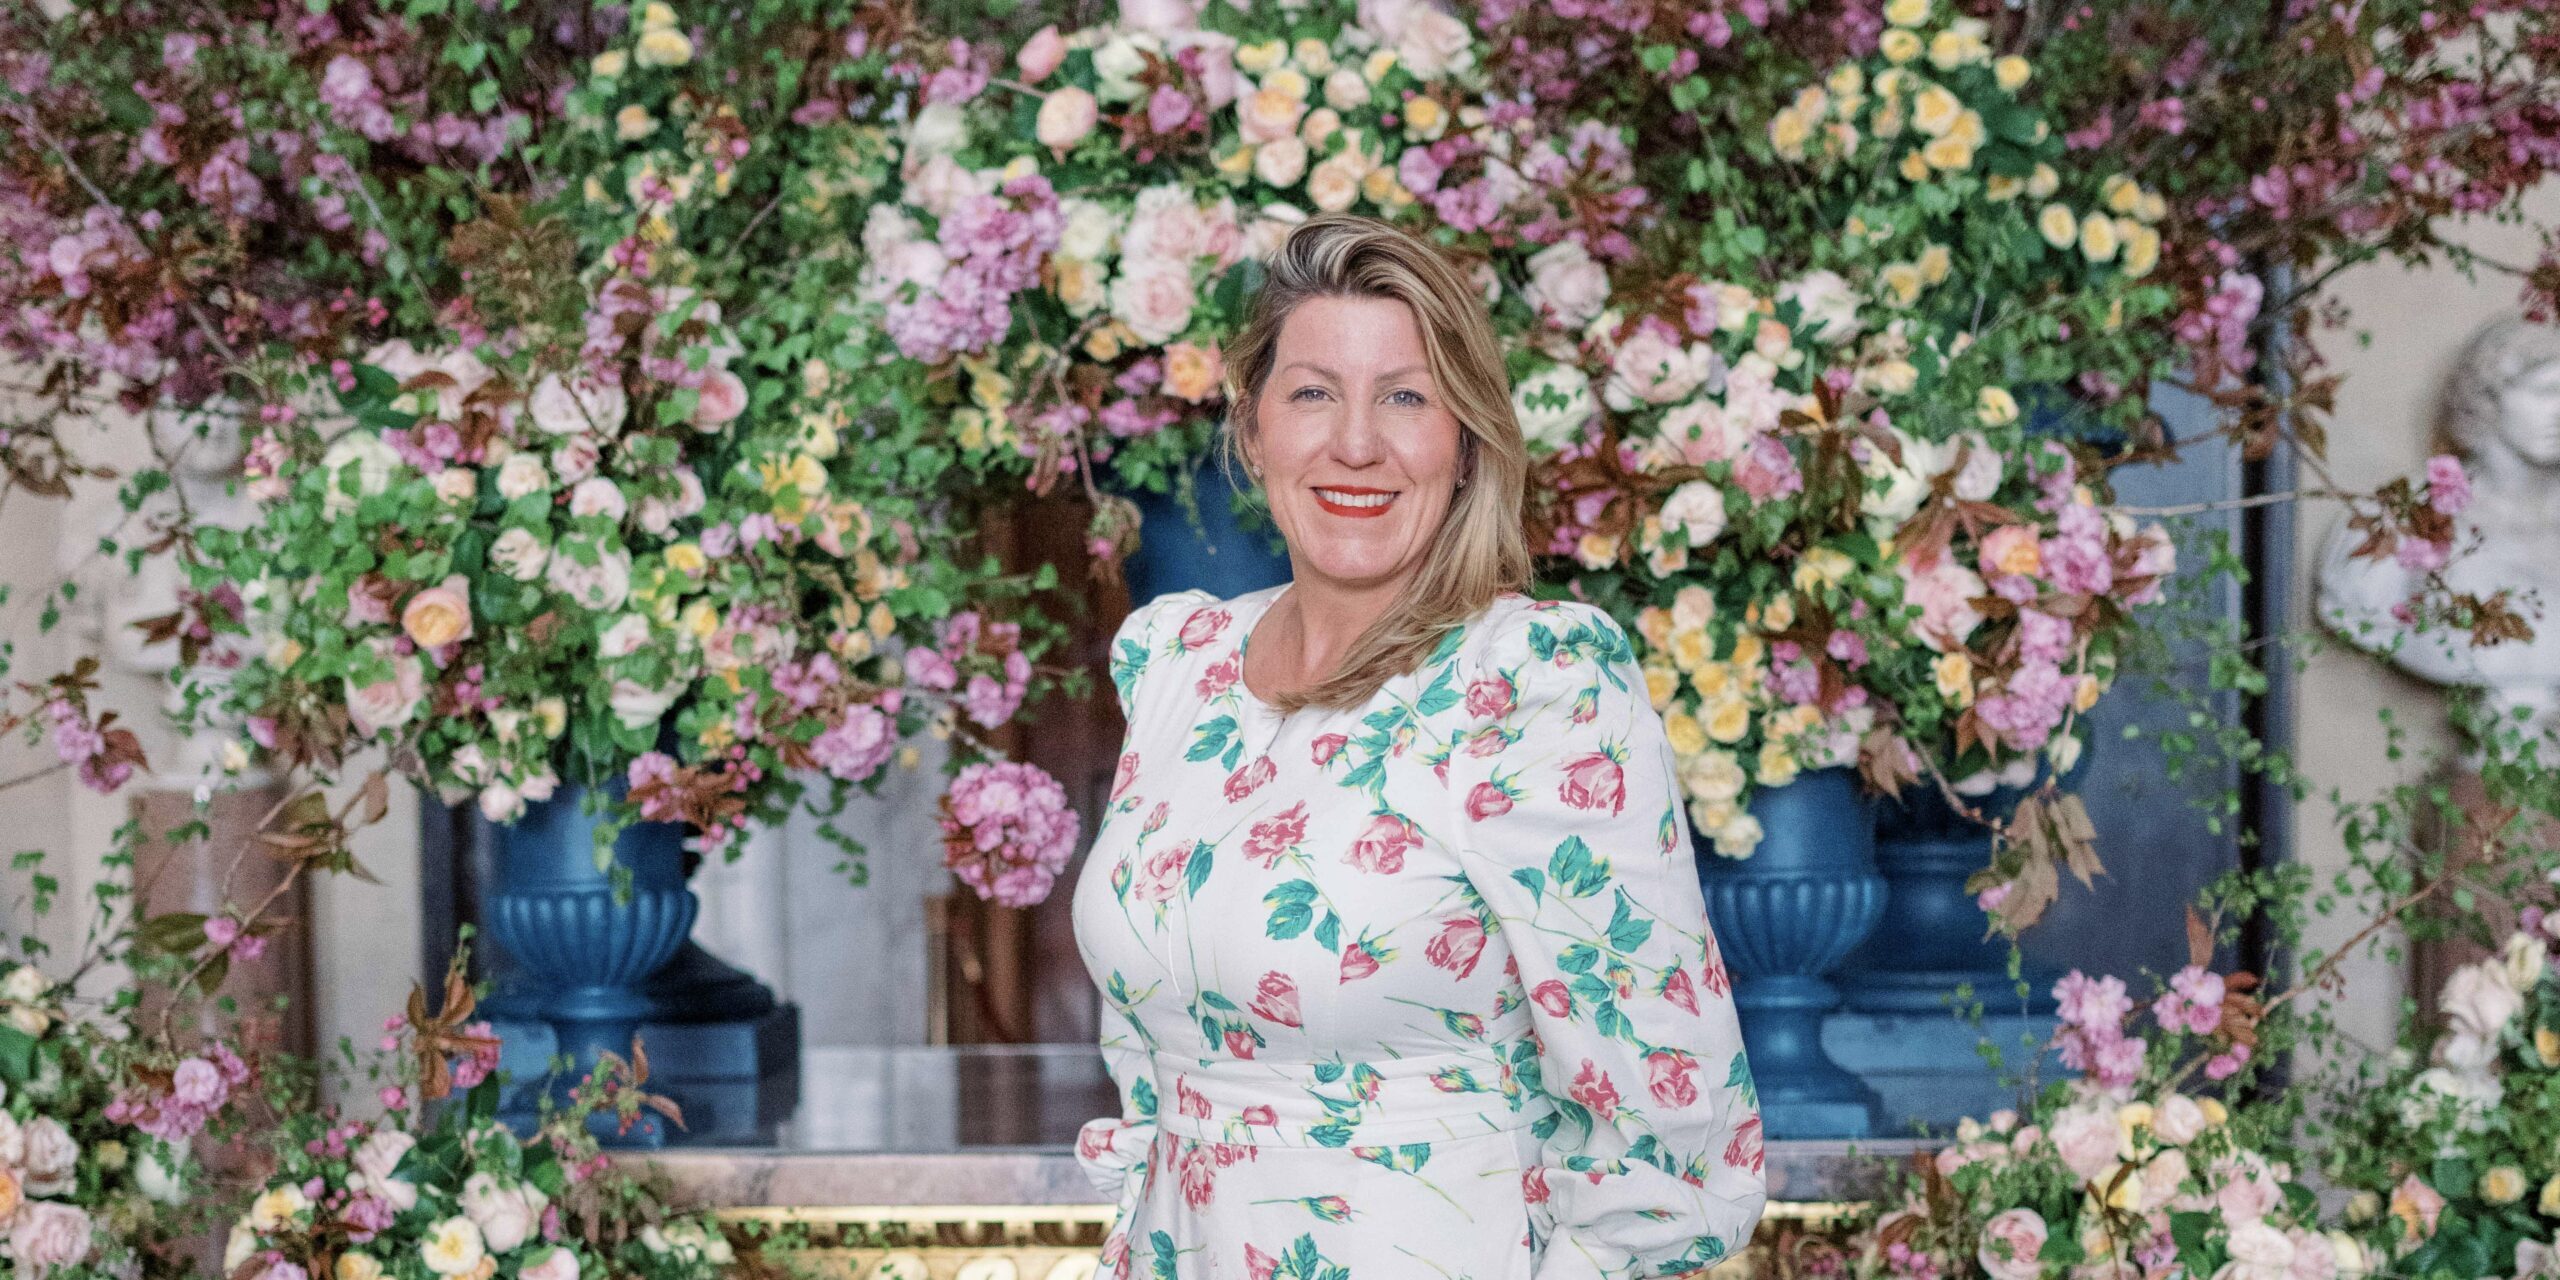 Luxury wedding and events florist and floral mentor, Paula Rooney, wearing a white dress standing in front of a colourful floral installation